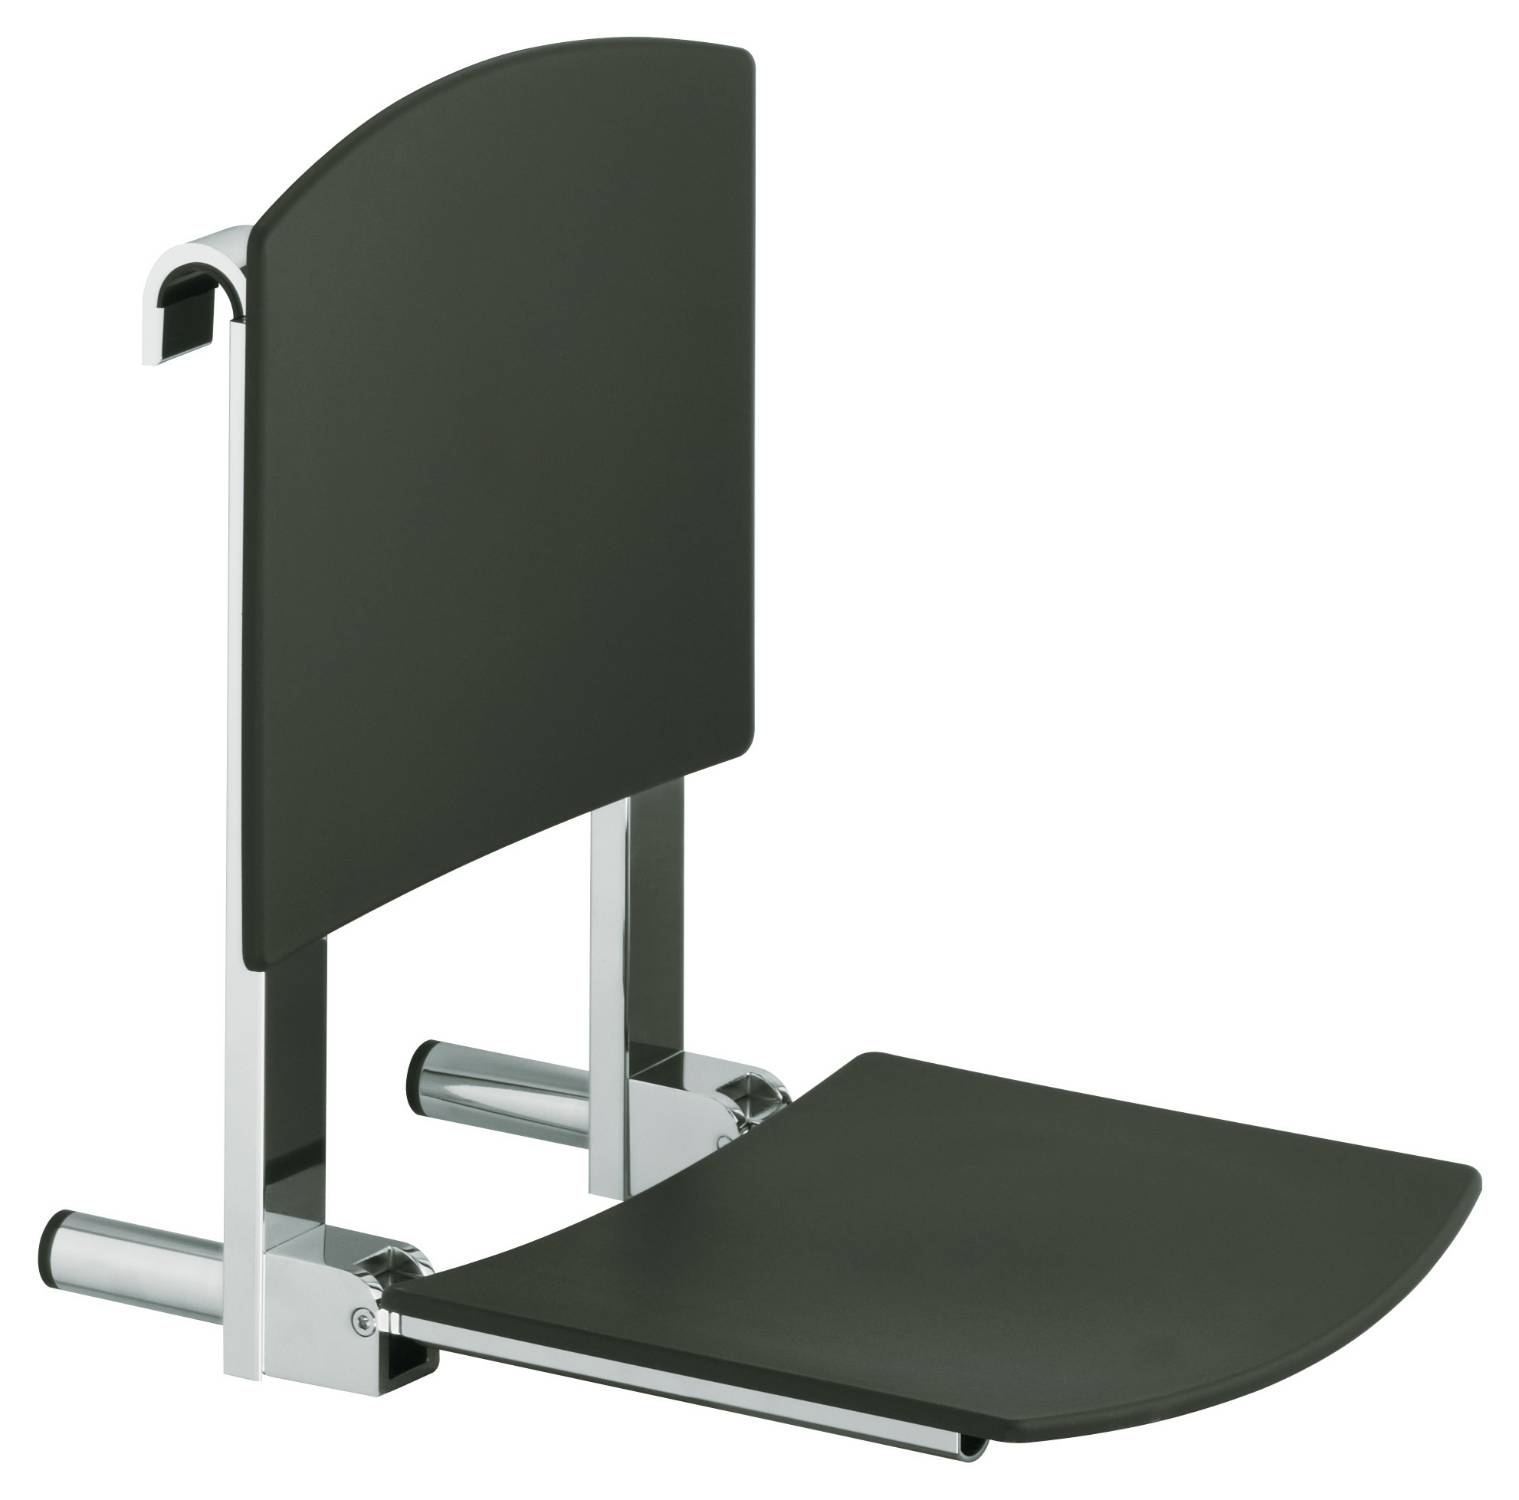 Folding Shower Seat - Removable - for Grab Bar Rail system - PLAN CARE - Shower seat